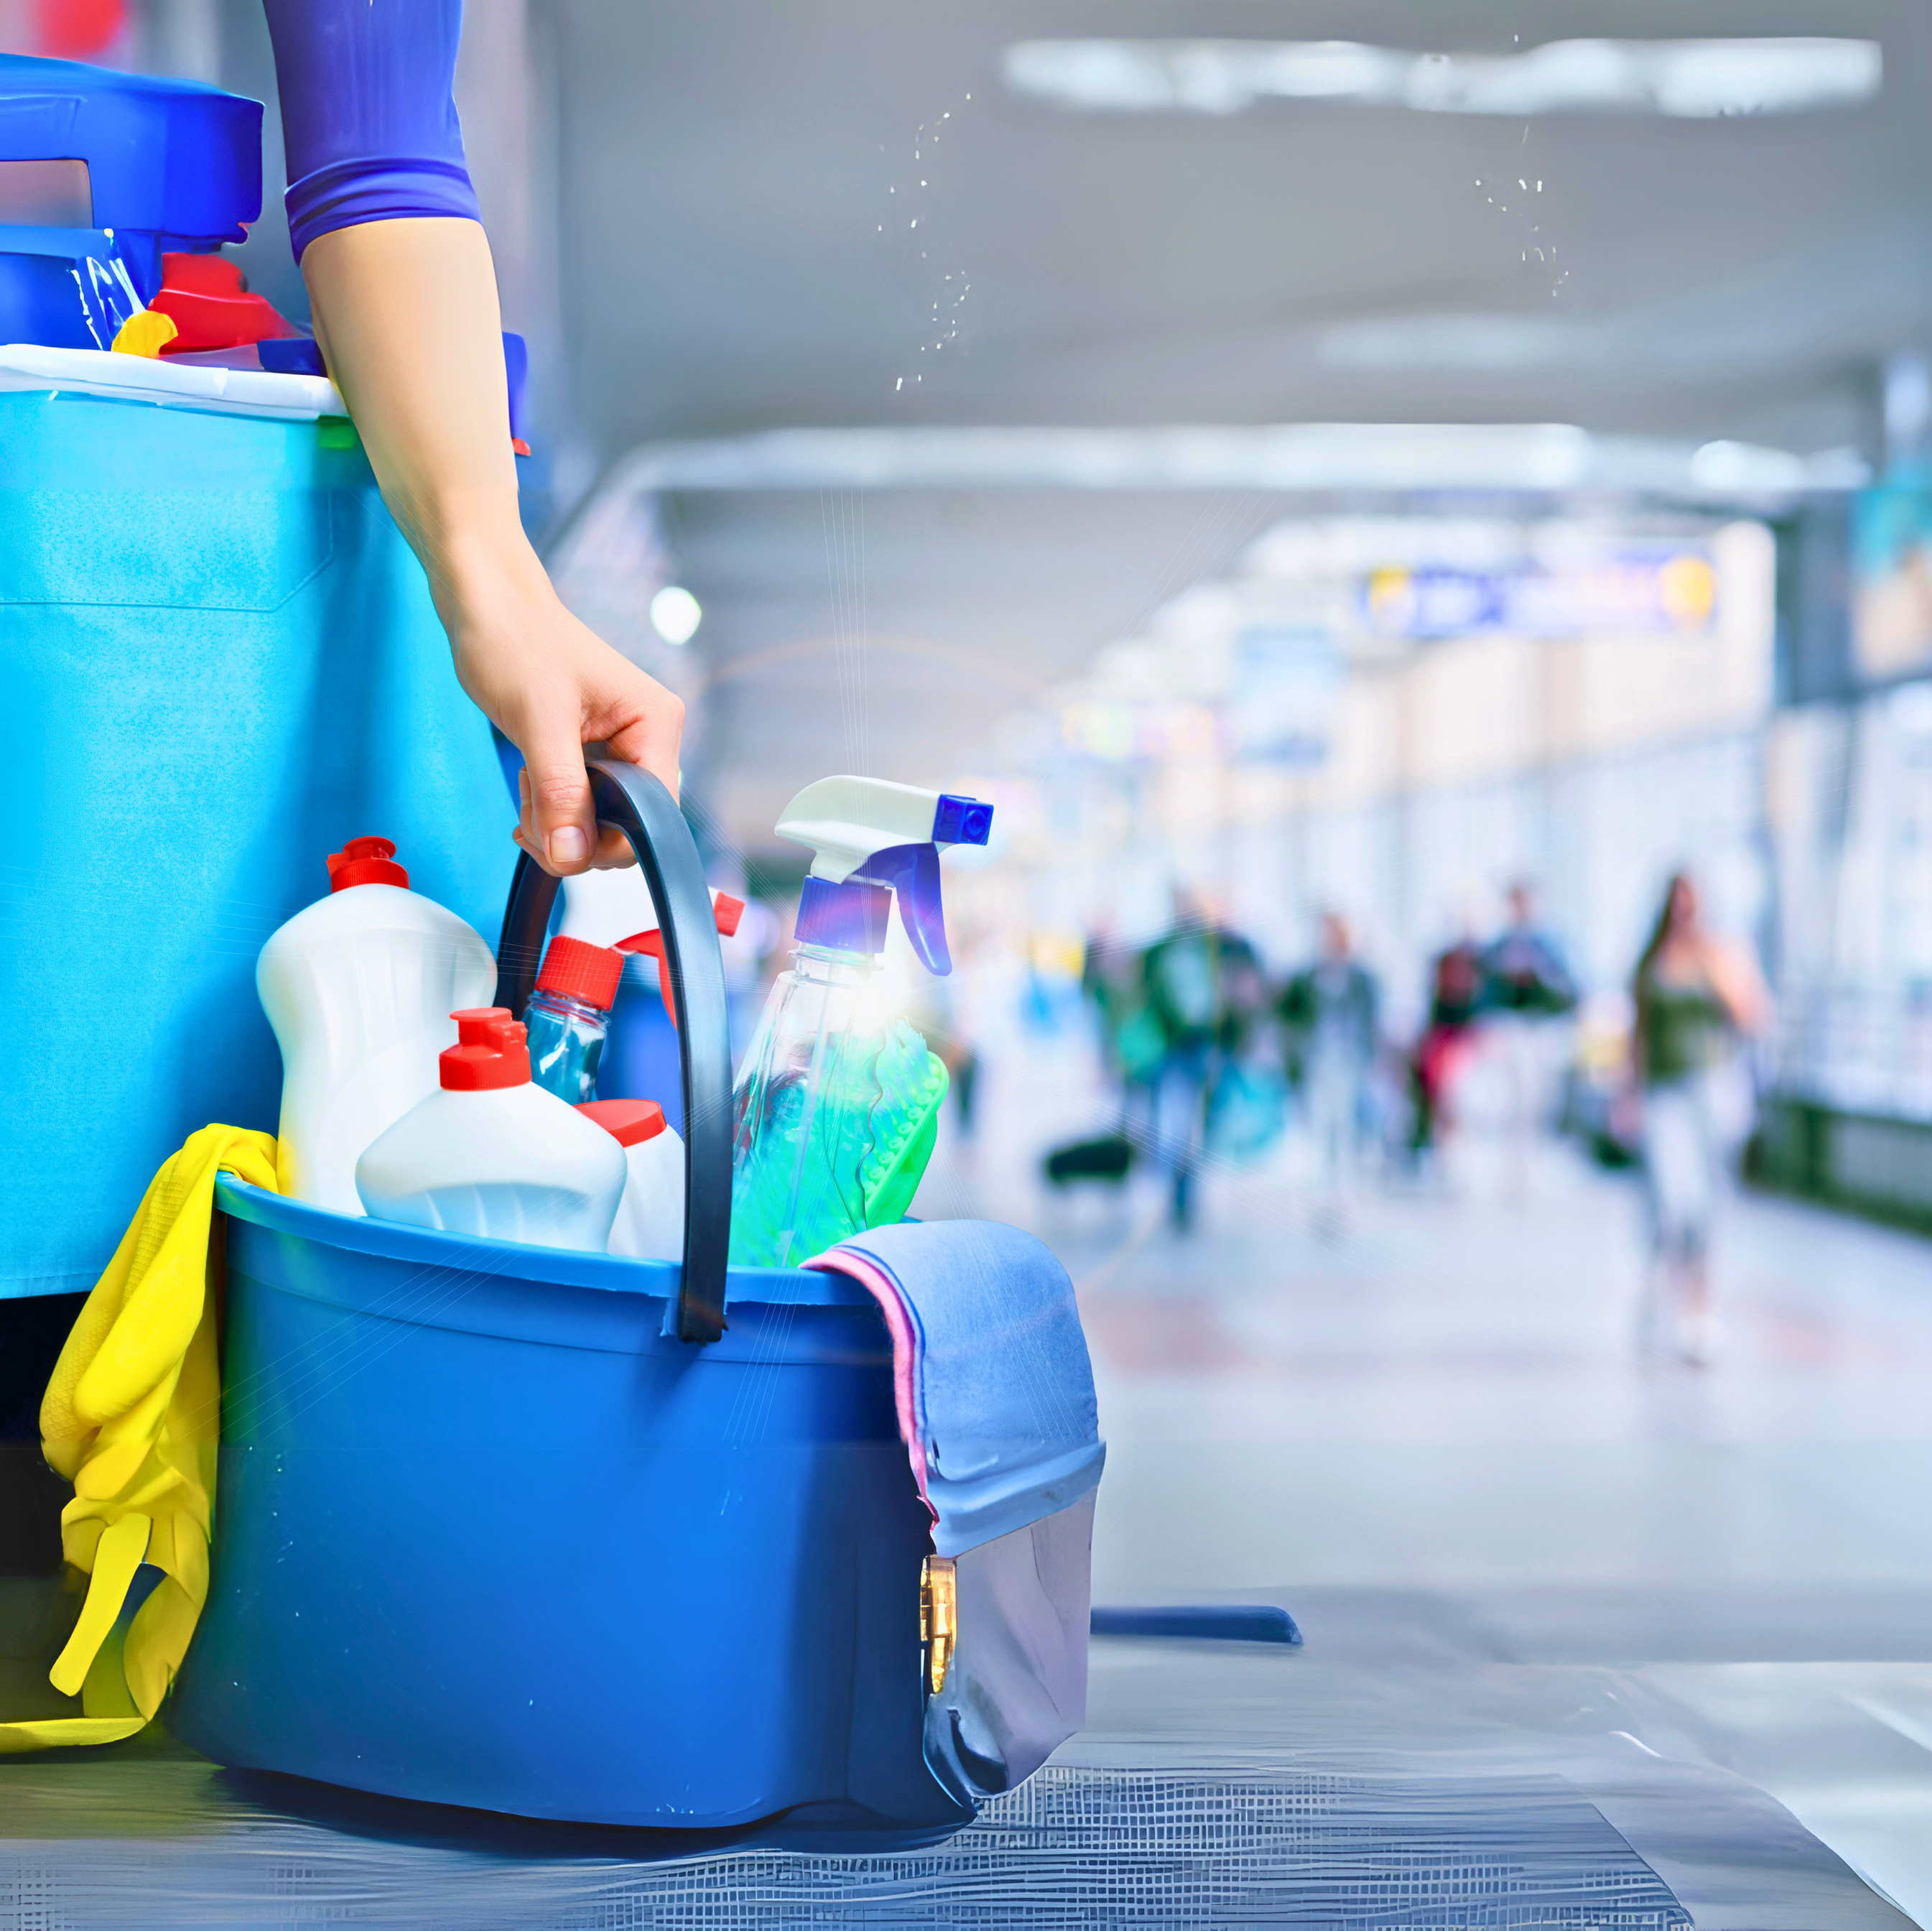 Cleaning Services in Sevenoaks area, Kent. Available 24/7 for Urgent Cleaning Needs at £17.50 per hour.
WhatsApp or Phone Sevenoaks Cleaning Services. We are at the center of  Sevenoaks town in Kent. Contact Us for urgent or regular orders.